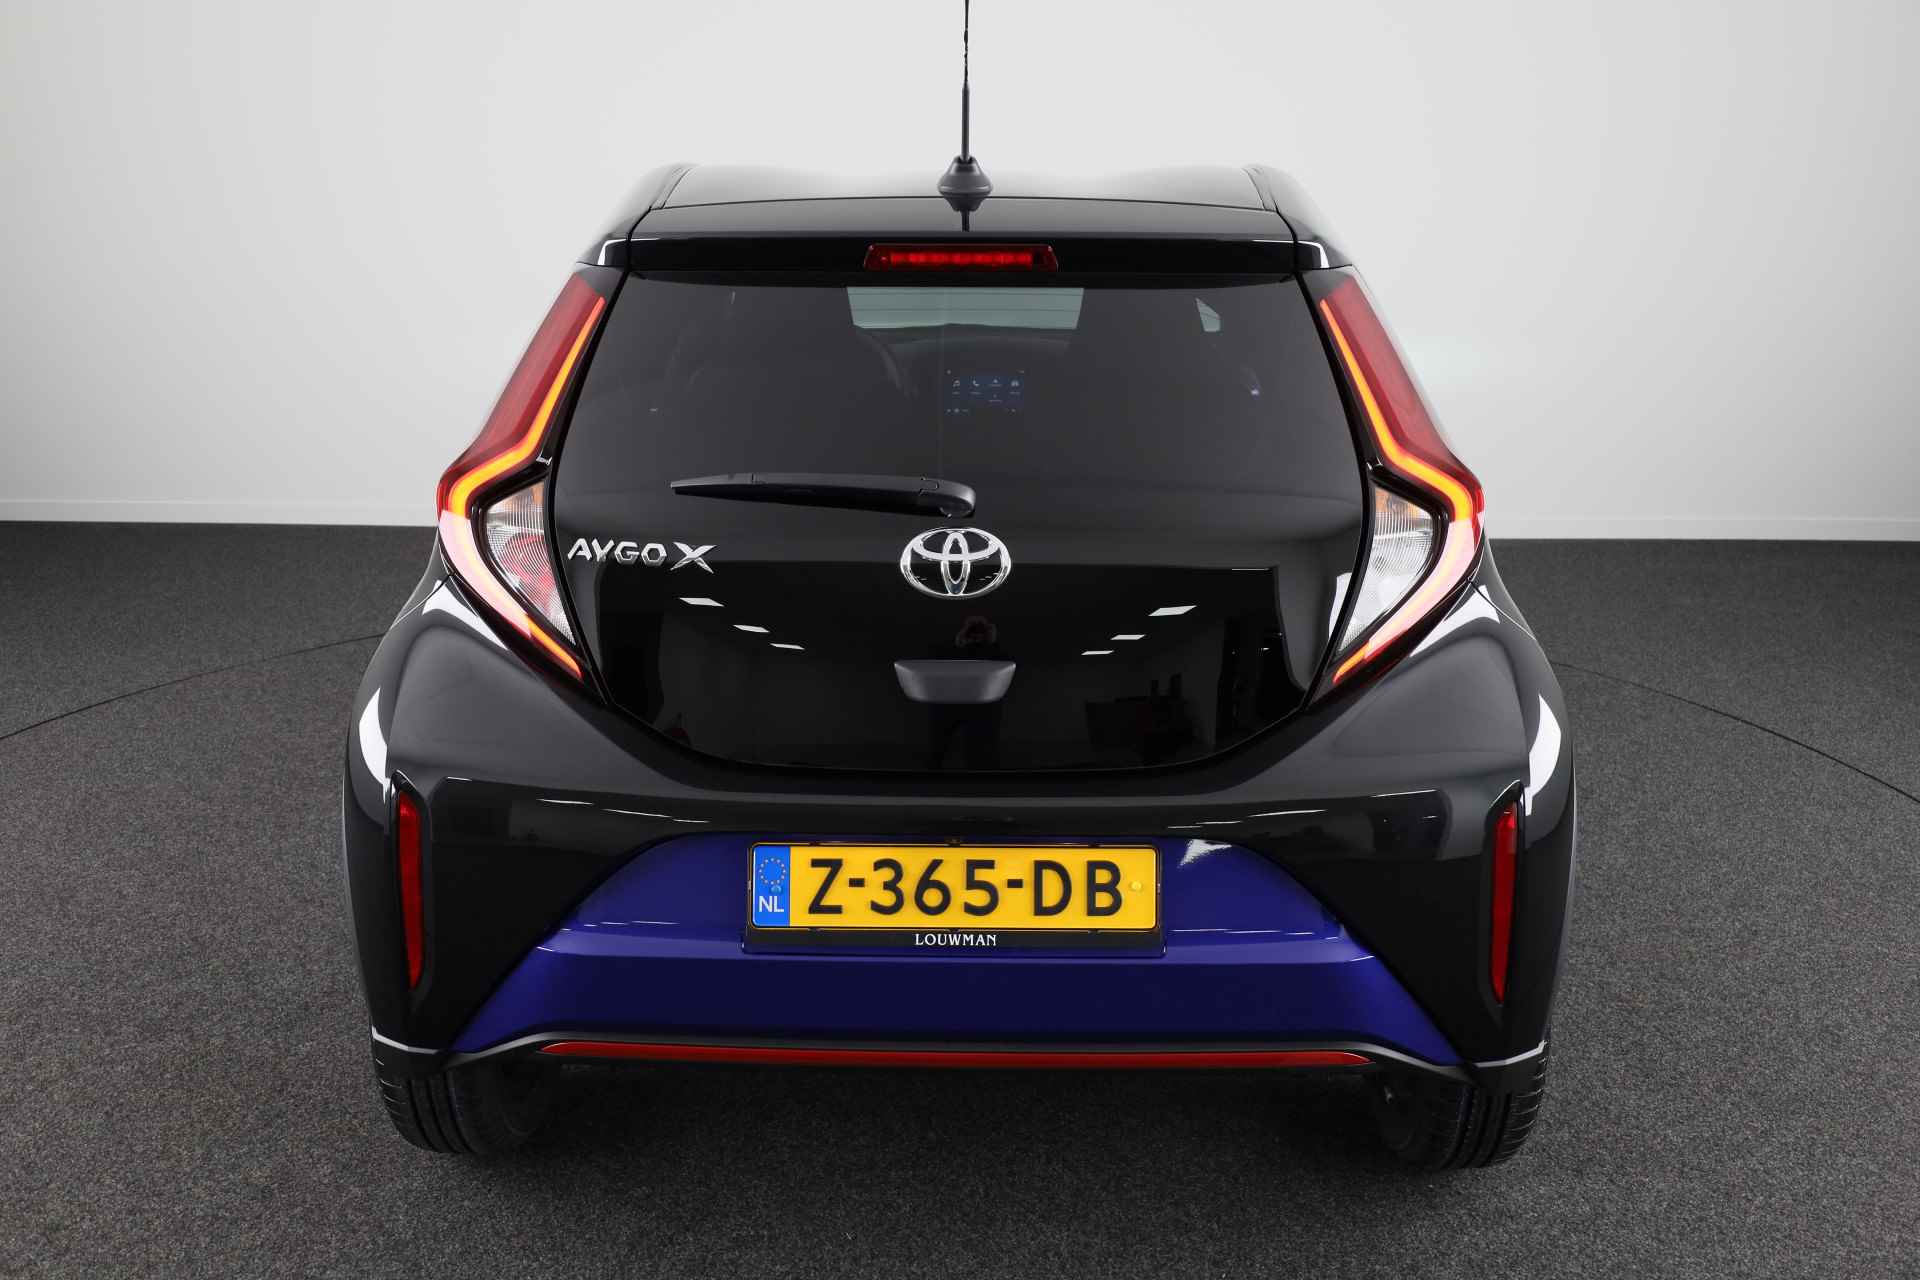 Toyota Aygo X 1.0 VVT-i S-CVT Automaat Pulse *Demo* | LED Verlichting | Climate Control | - 25/36